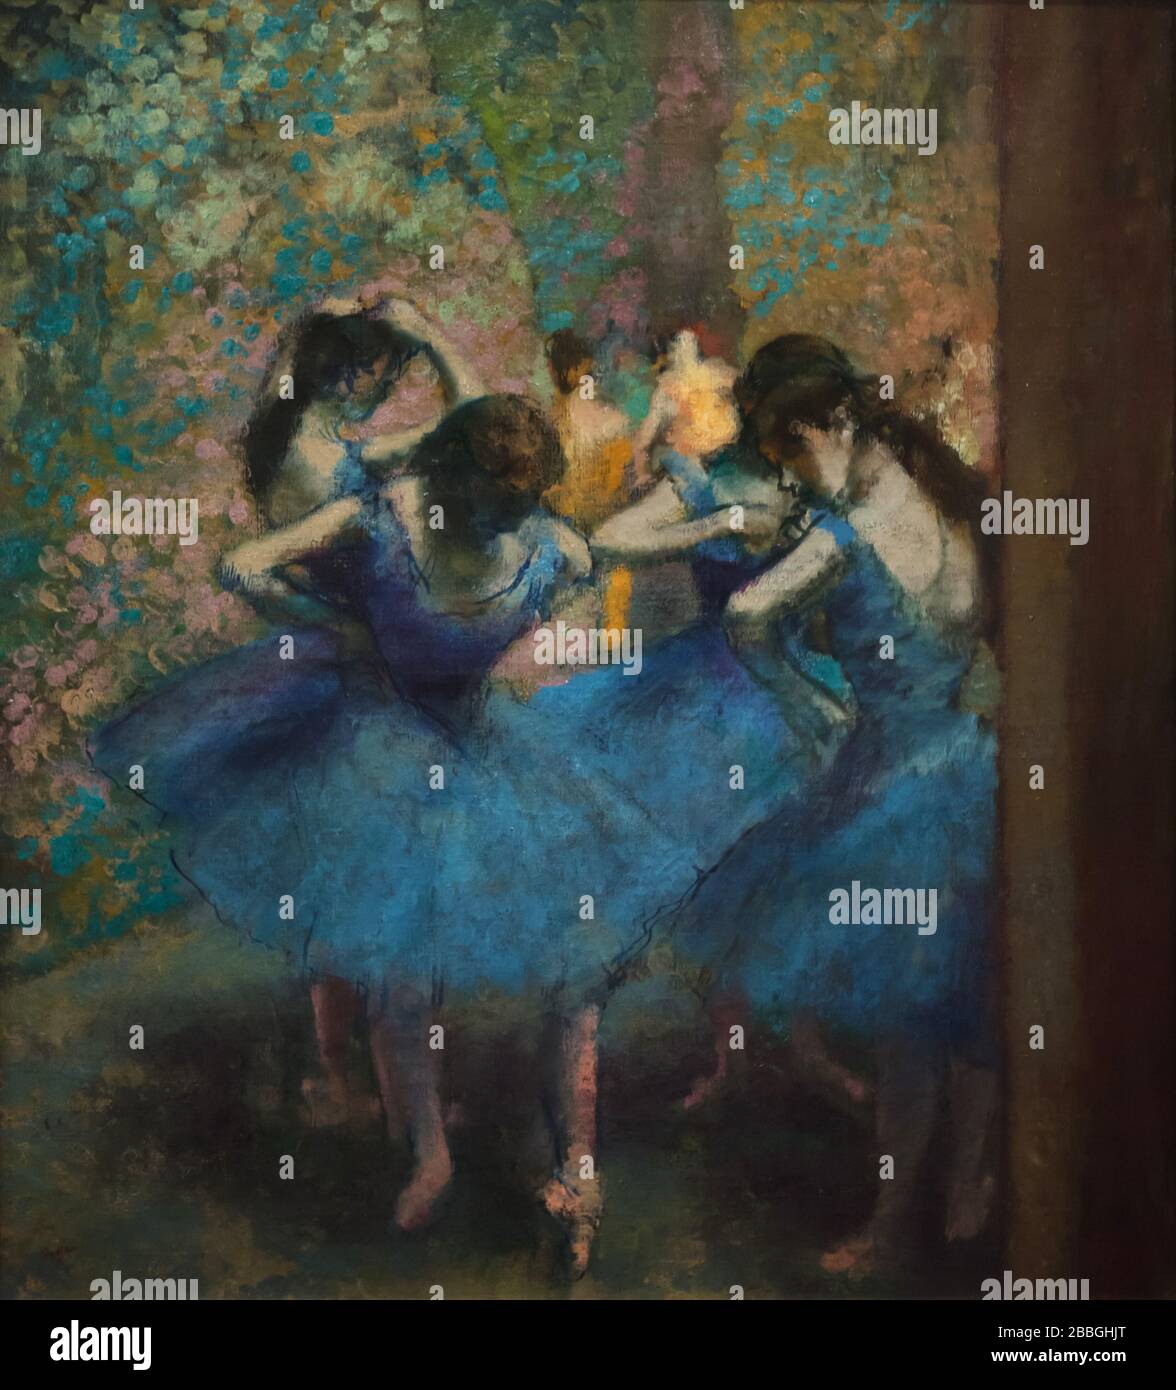 Pastel ' Blue Dancers' by French Impressionist artist Edgar Degas (1893-1896) on display at his exhibition in the Musée d'Orsay in Paris, France. The exhibition devoted to the artist passionate relationship with the theatre runs till 19 January 2020. Stock Photo